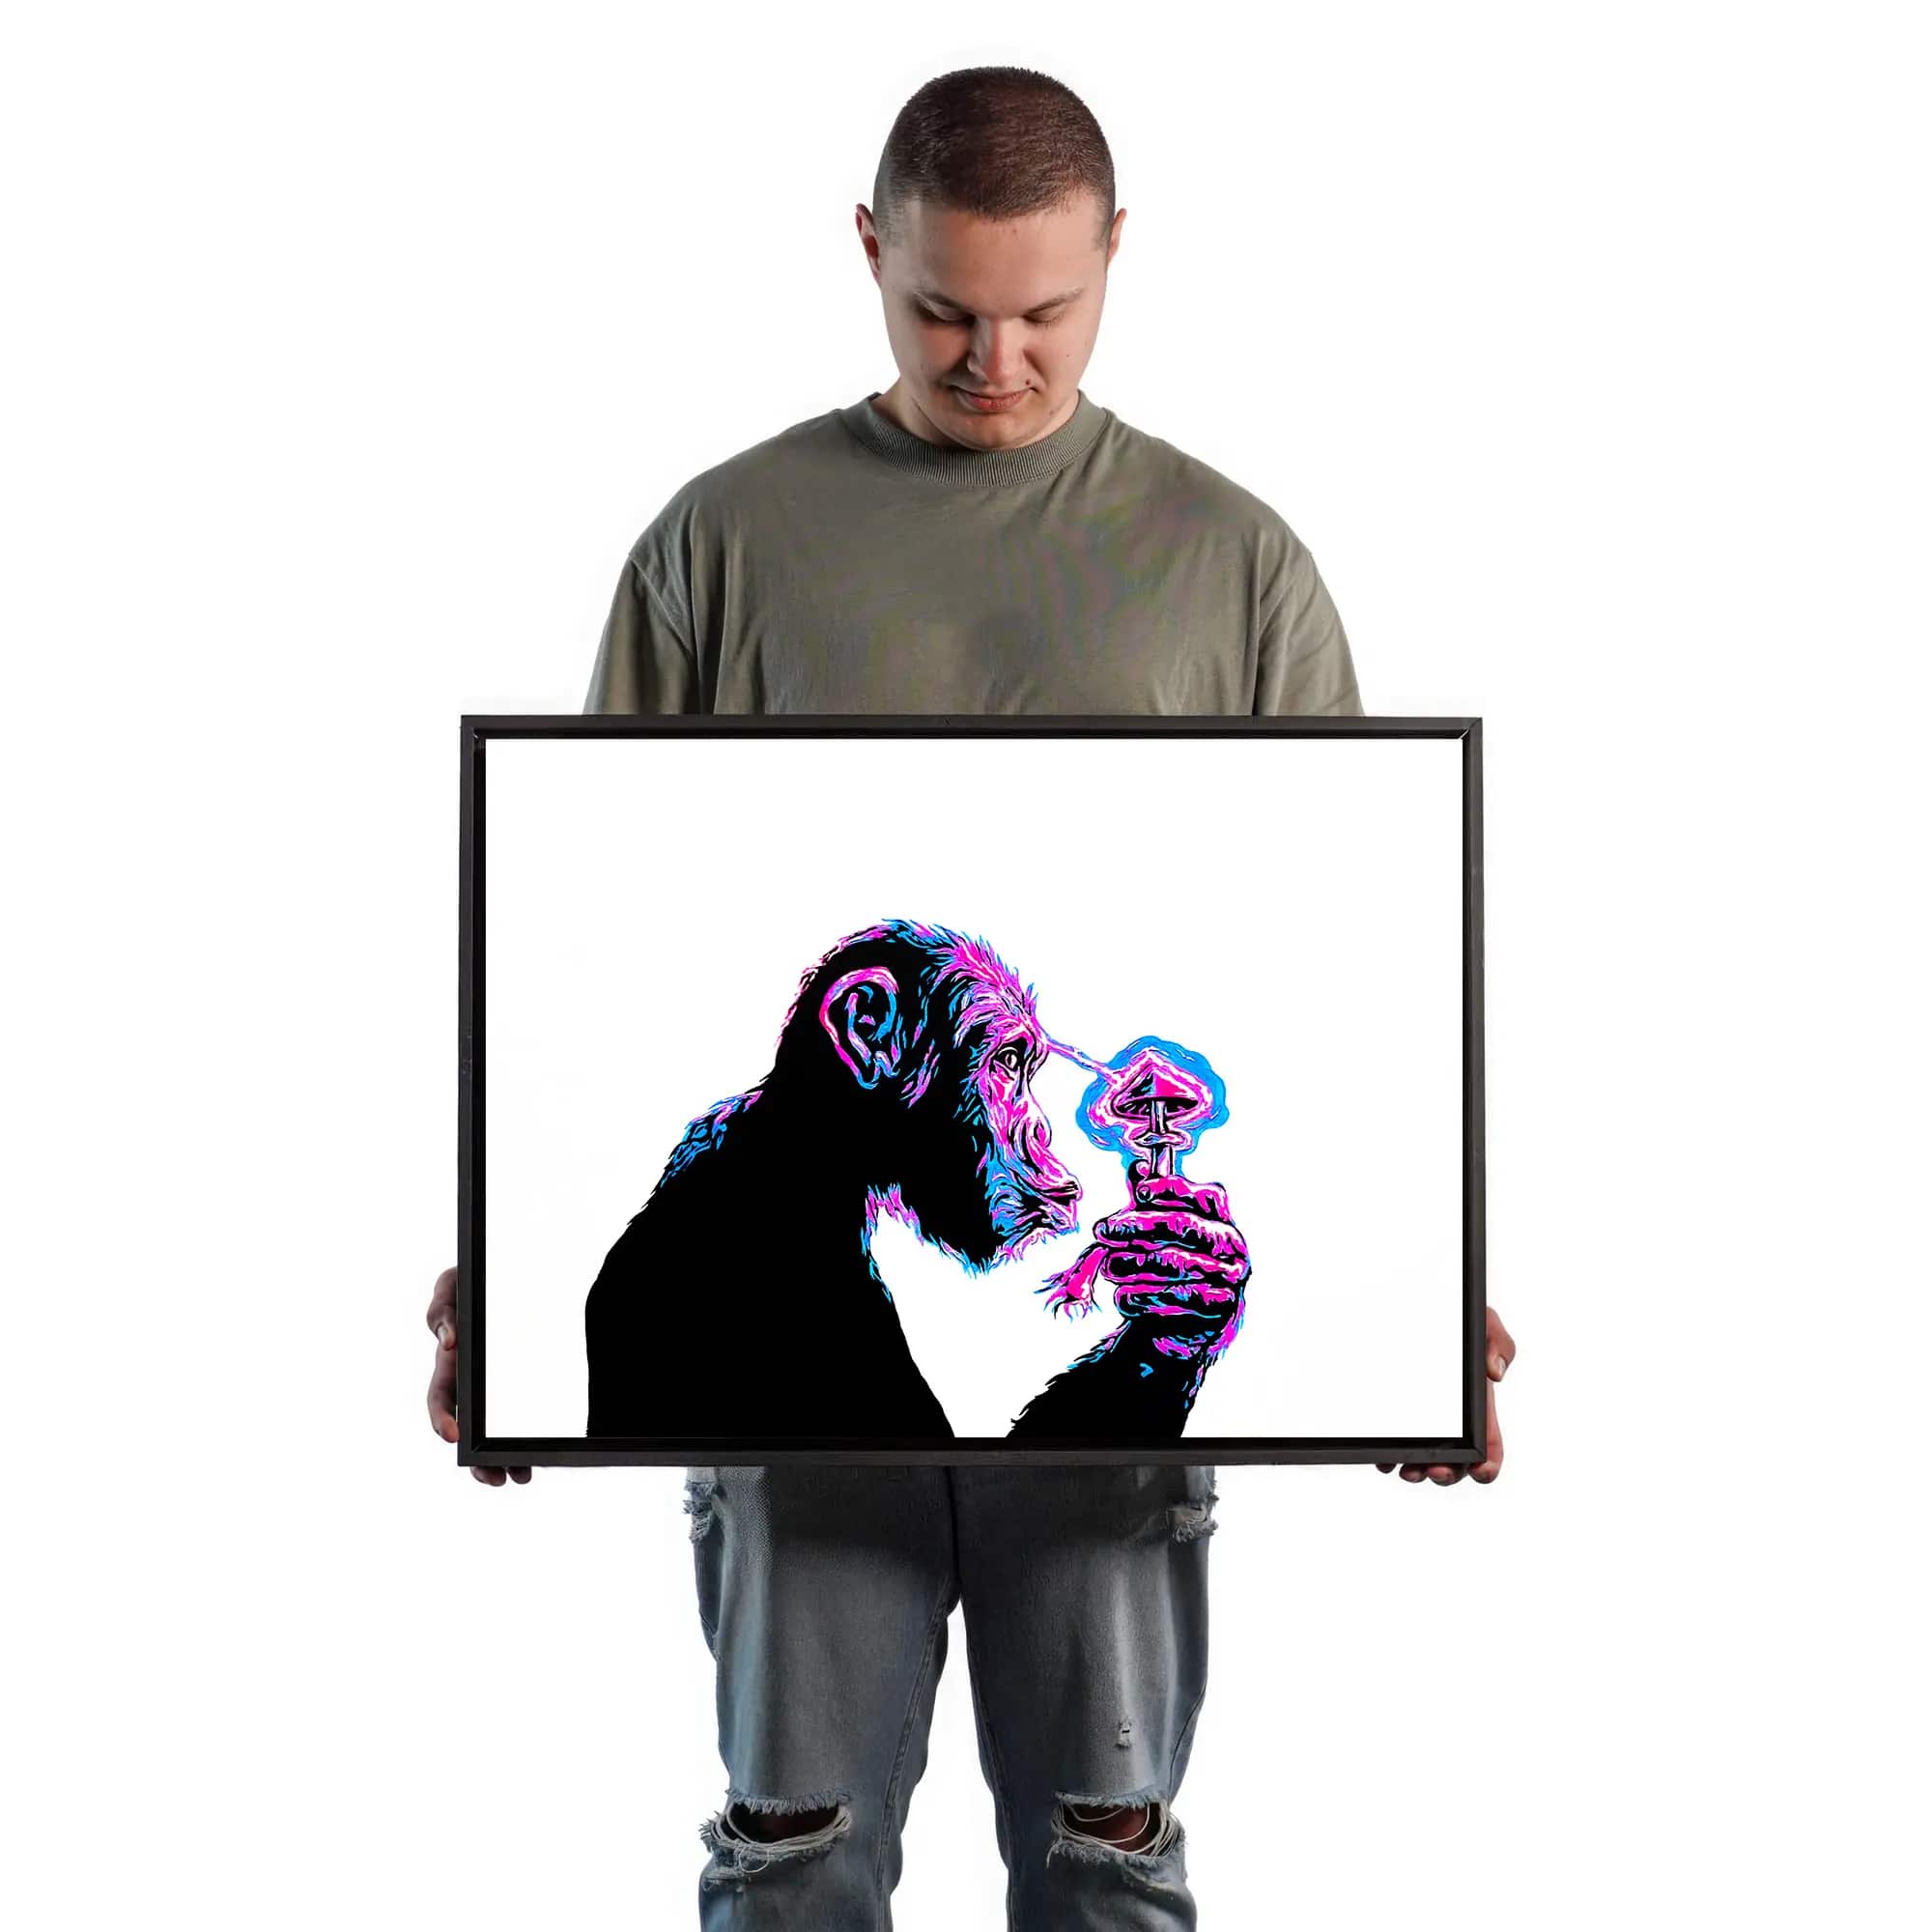 Artist holding portraits of Stoned Ape: on the left, a 50x70 centimeter stencil art. The picture is being used as a size reference, comparing it to the size of a real human body.